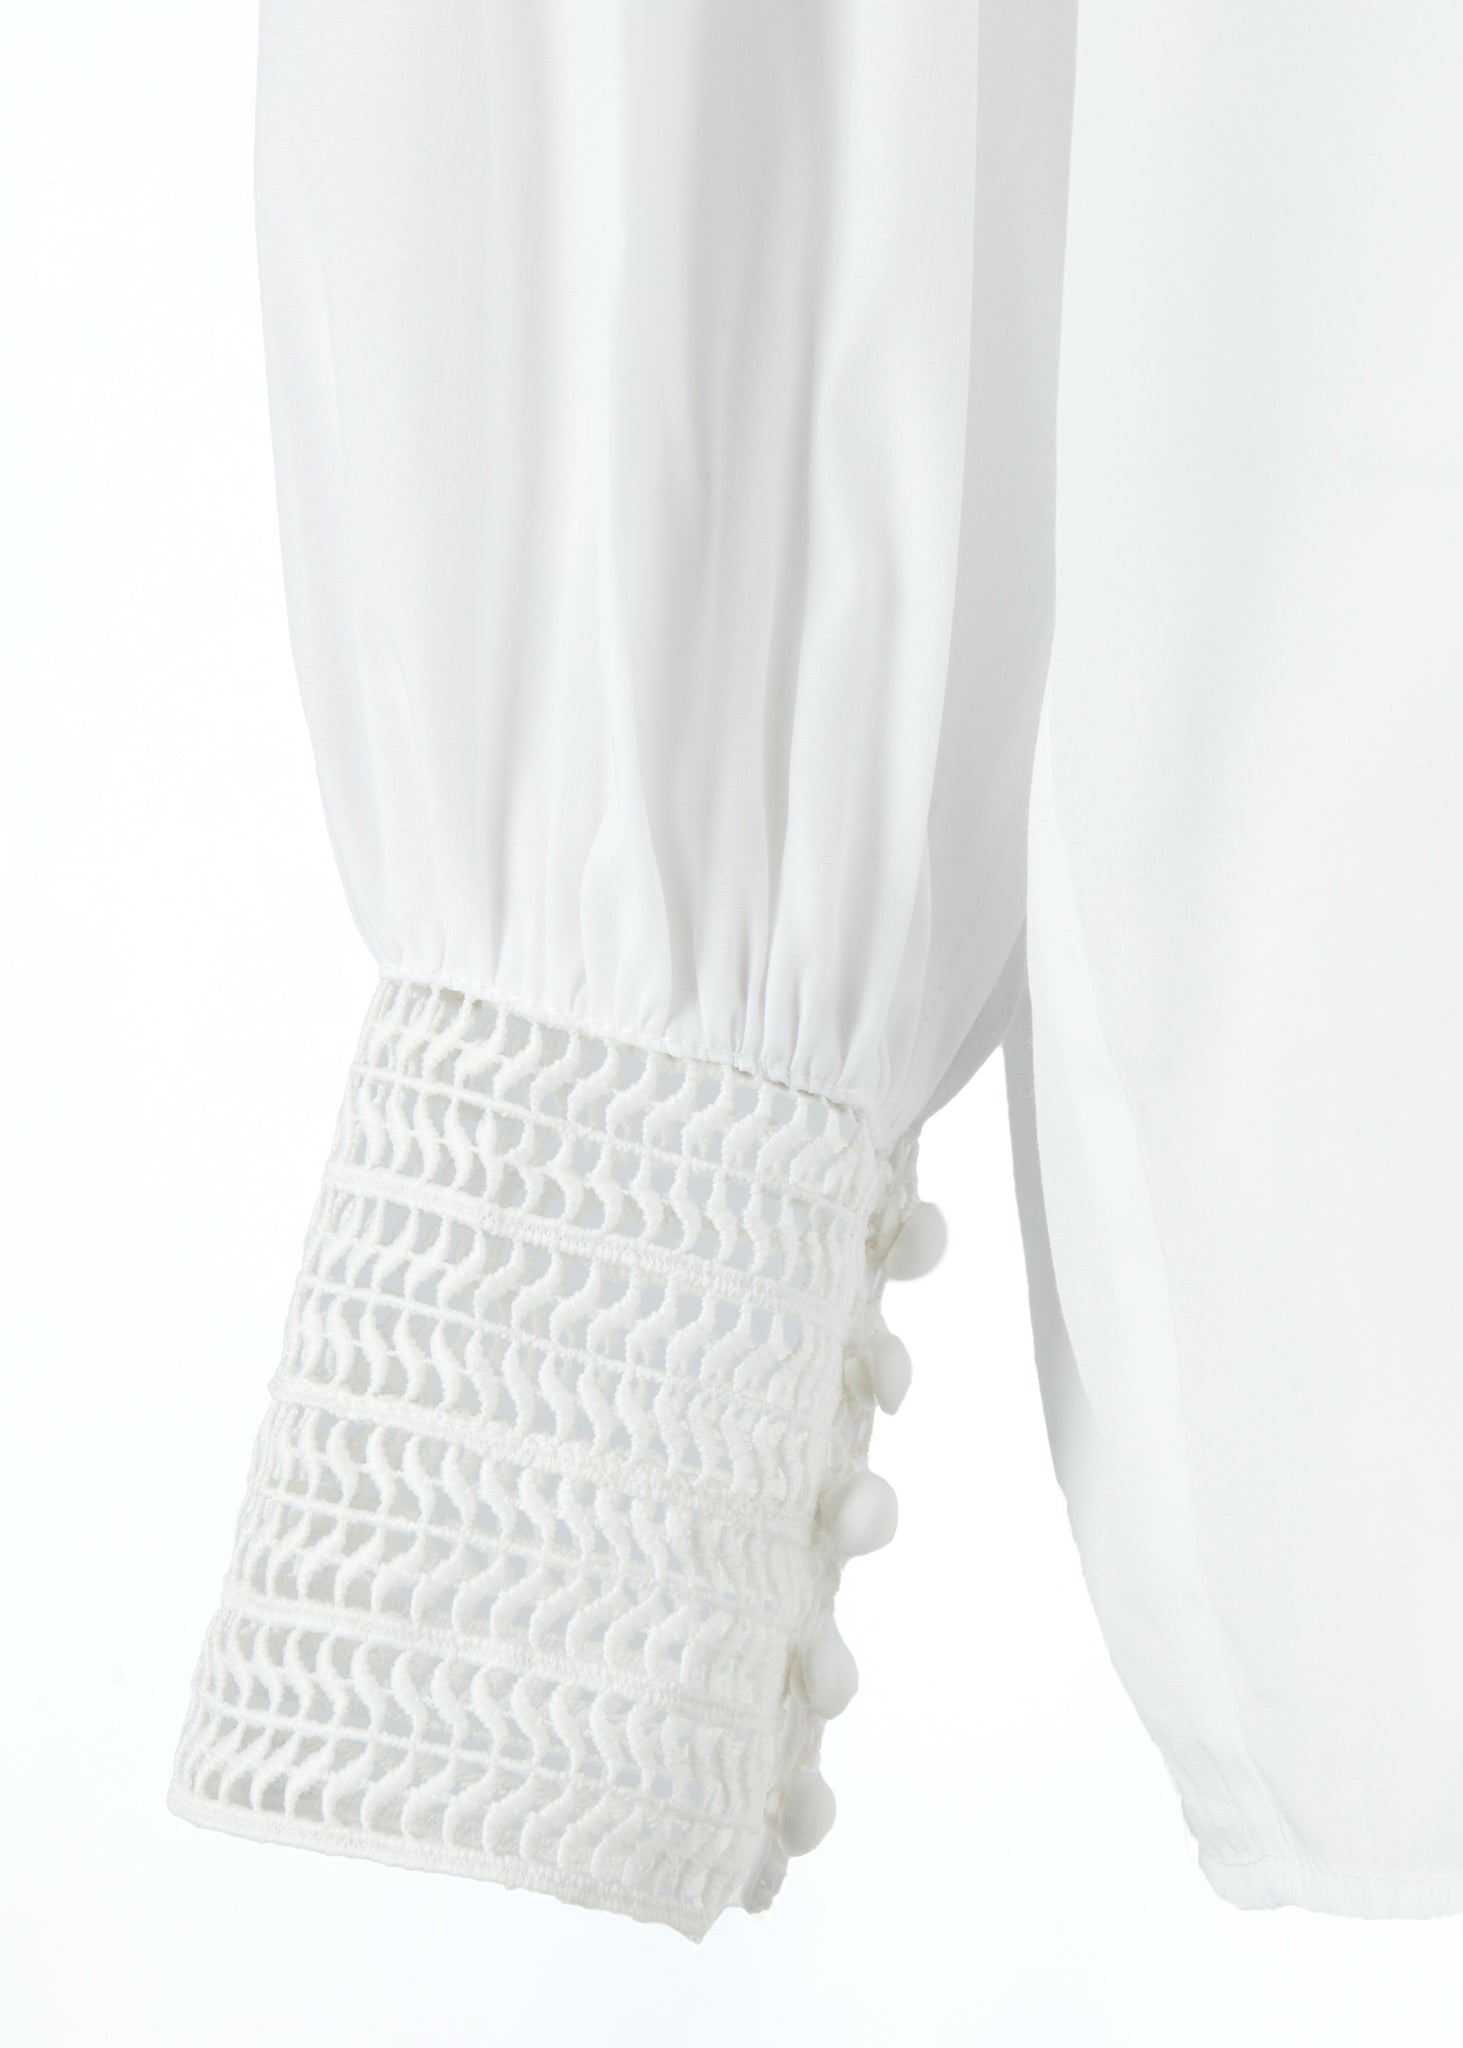 arm cuff detail on womens white polyester shirt with lace detail to the collar shoulders and arm cuffs and balloon sleeve